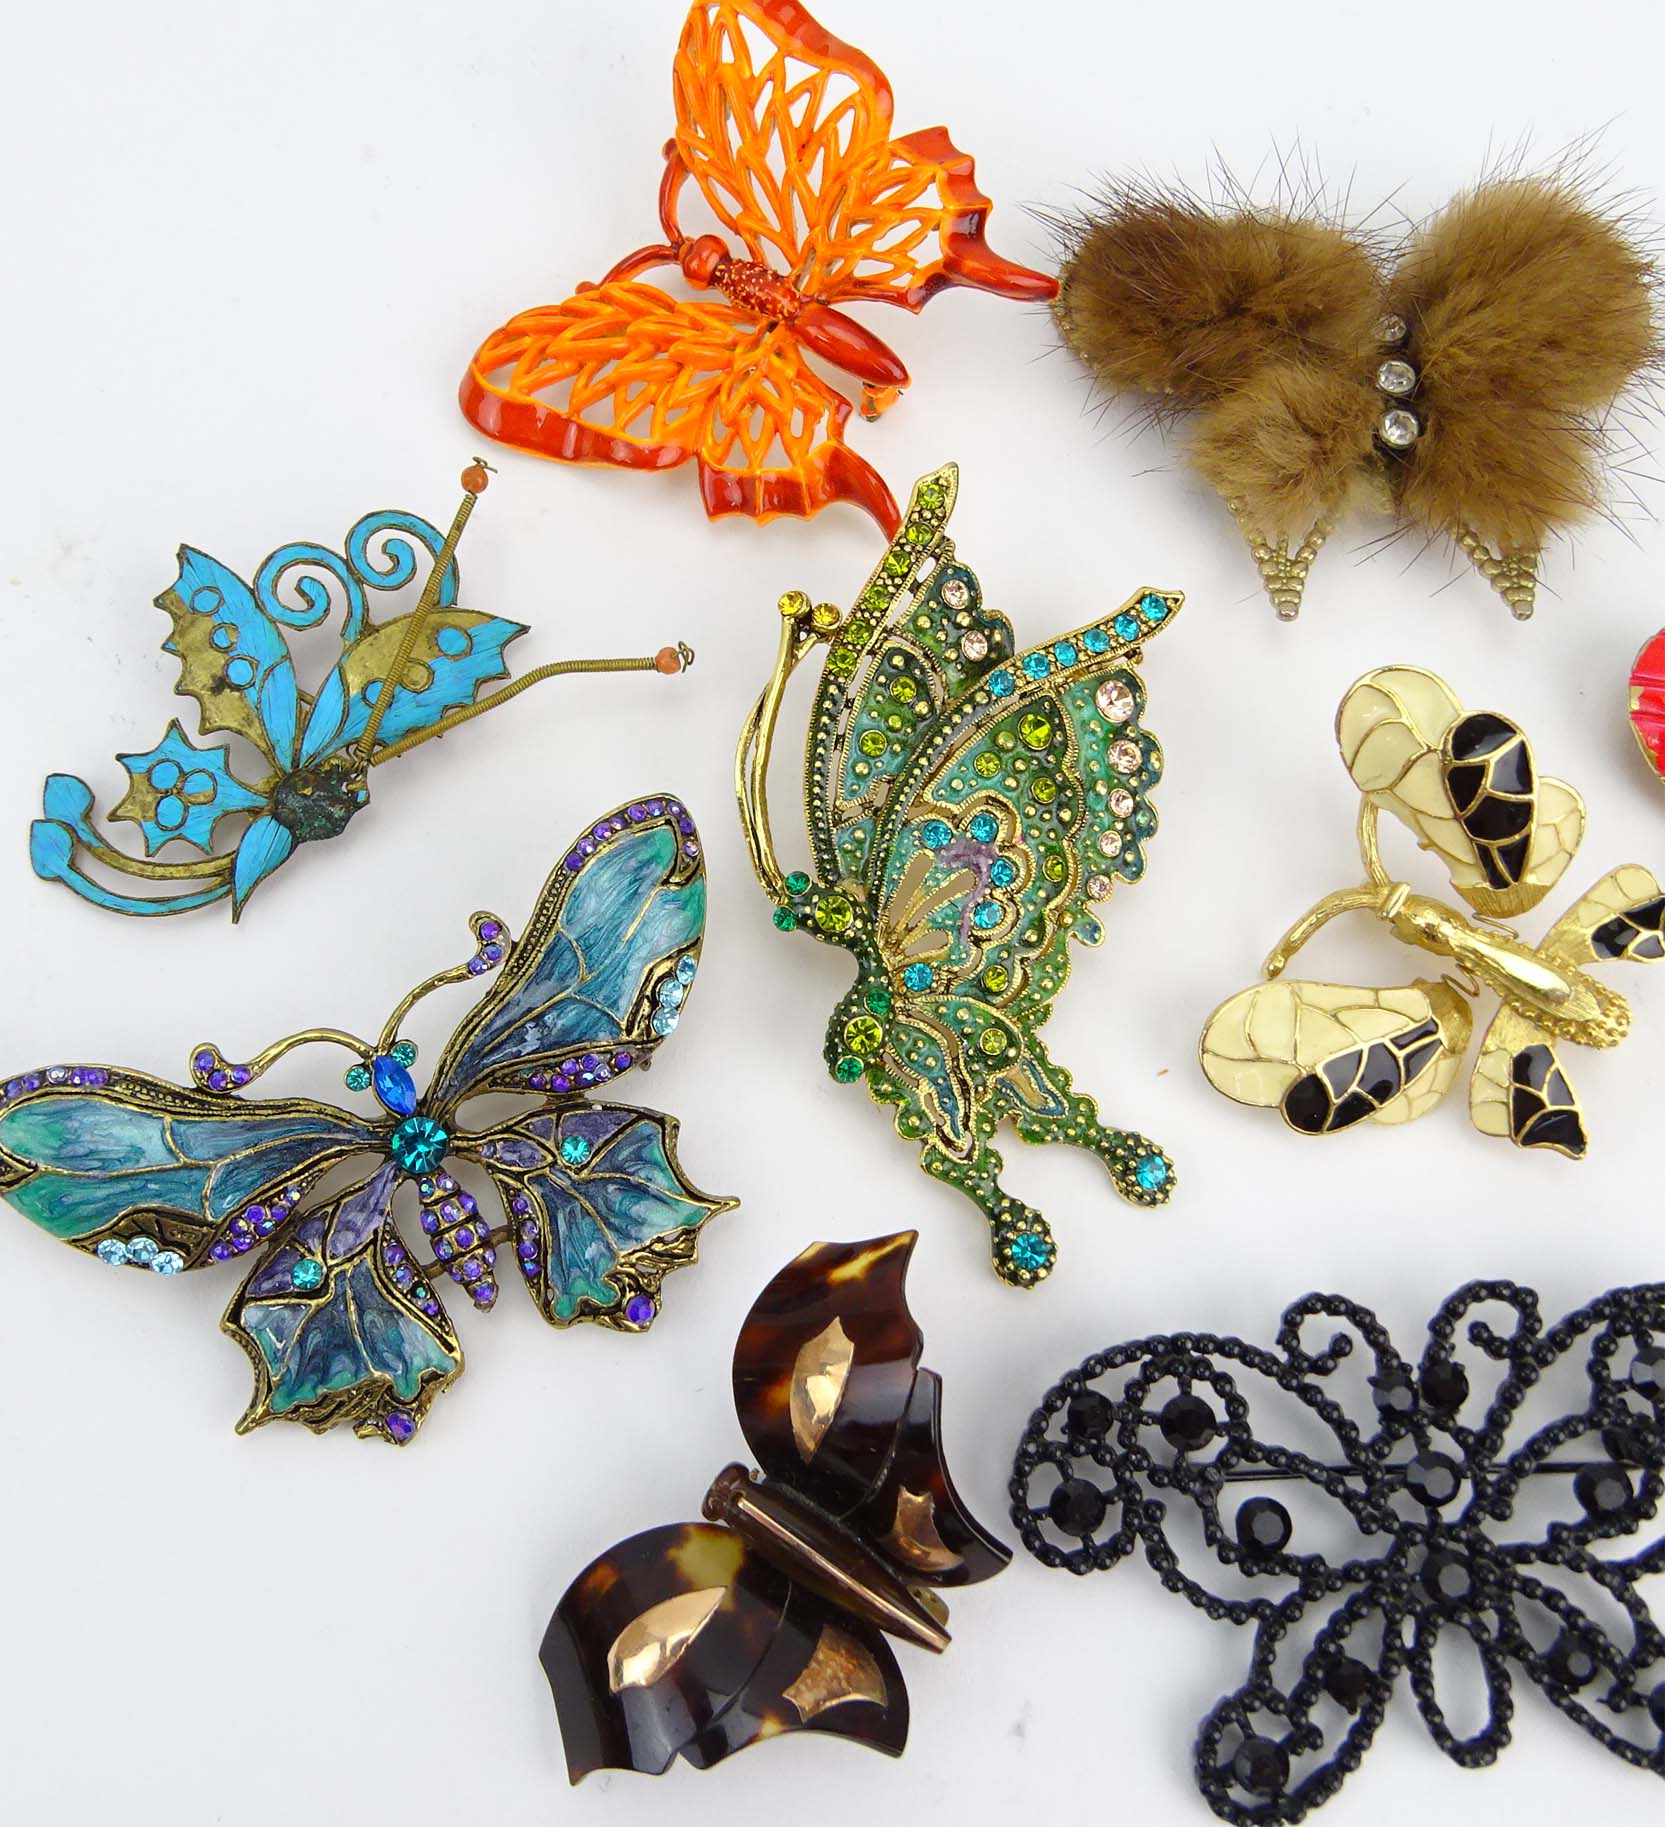 Collection of Seventeen (17) Fashion Butterfly Brooches variously with enamel and faux gem stones.